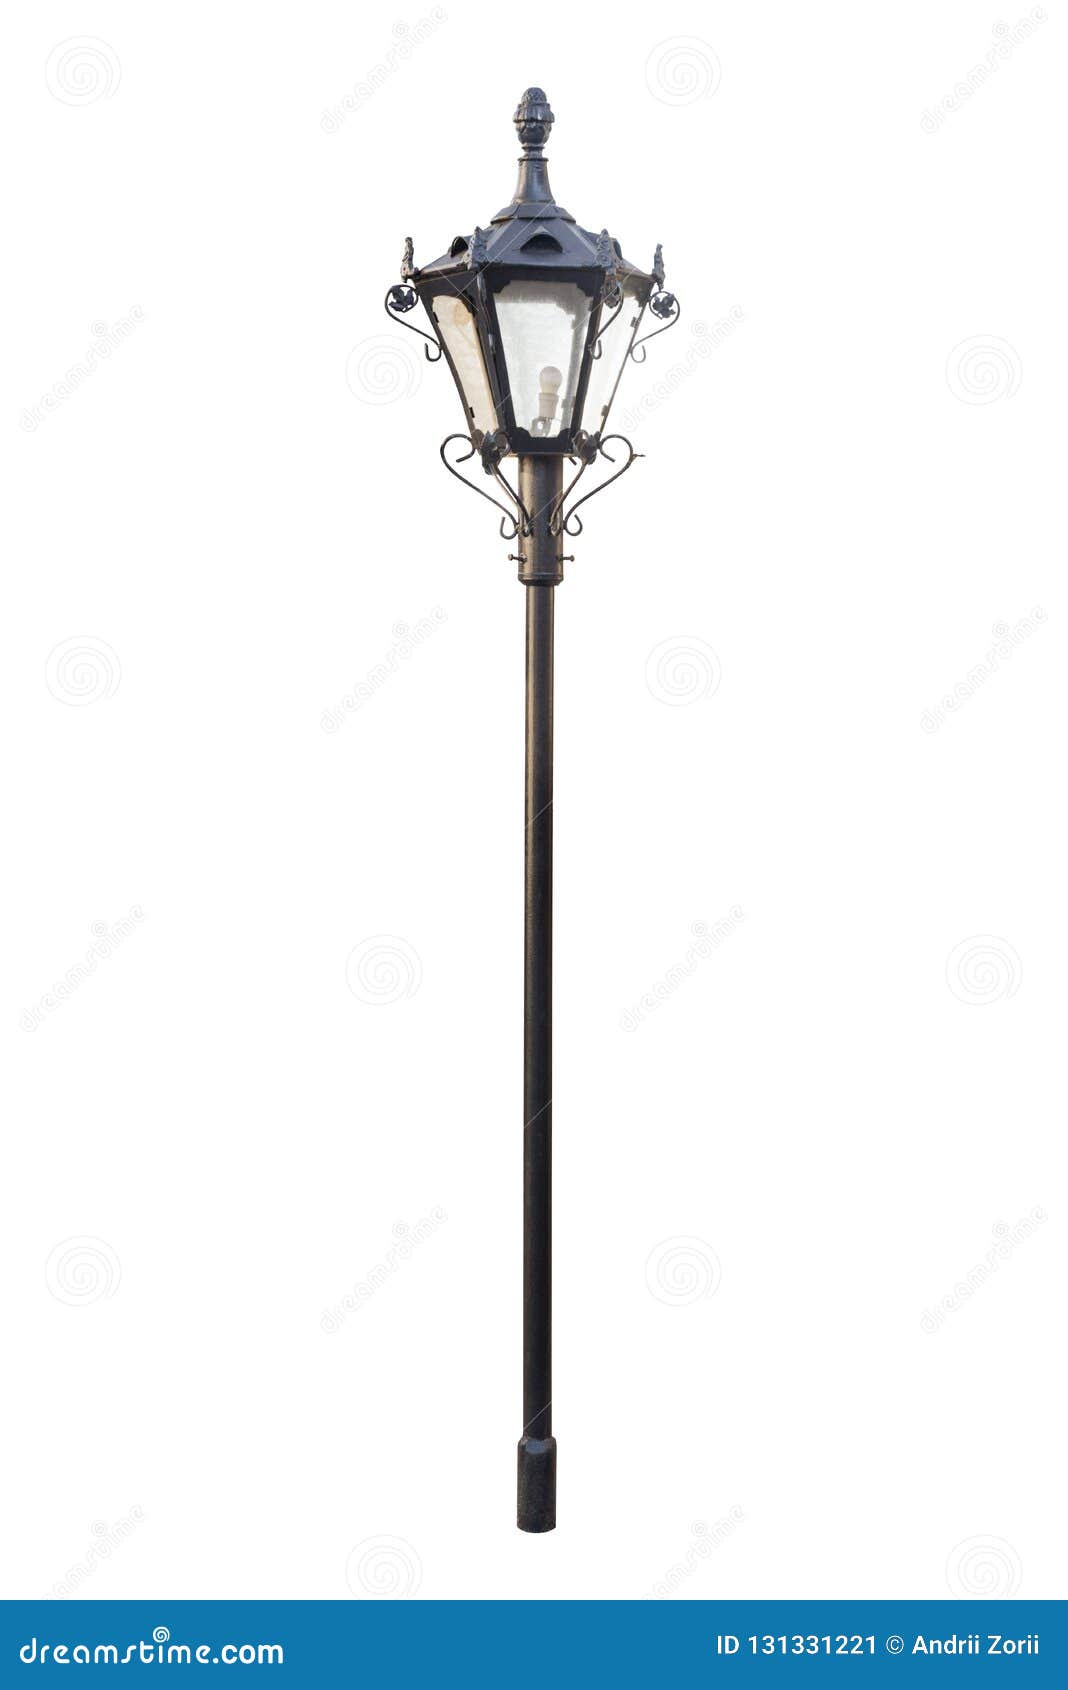 Street Lamp Isolated on White Background. Lamp Post Street Road Light Pole  Stock Image - Image of classic, cityscape: 131331221